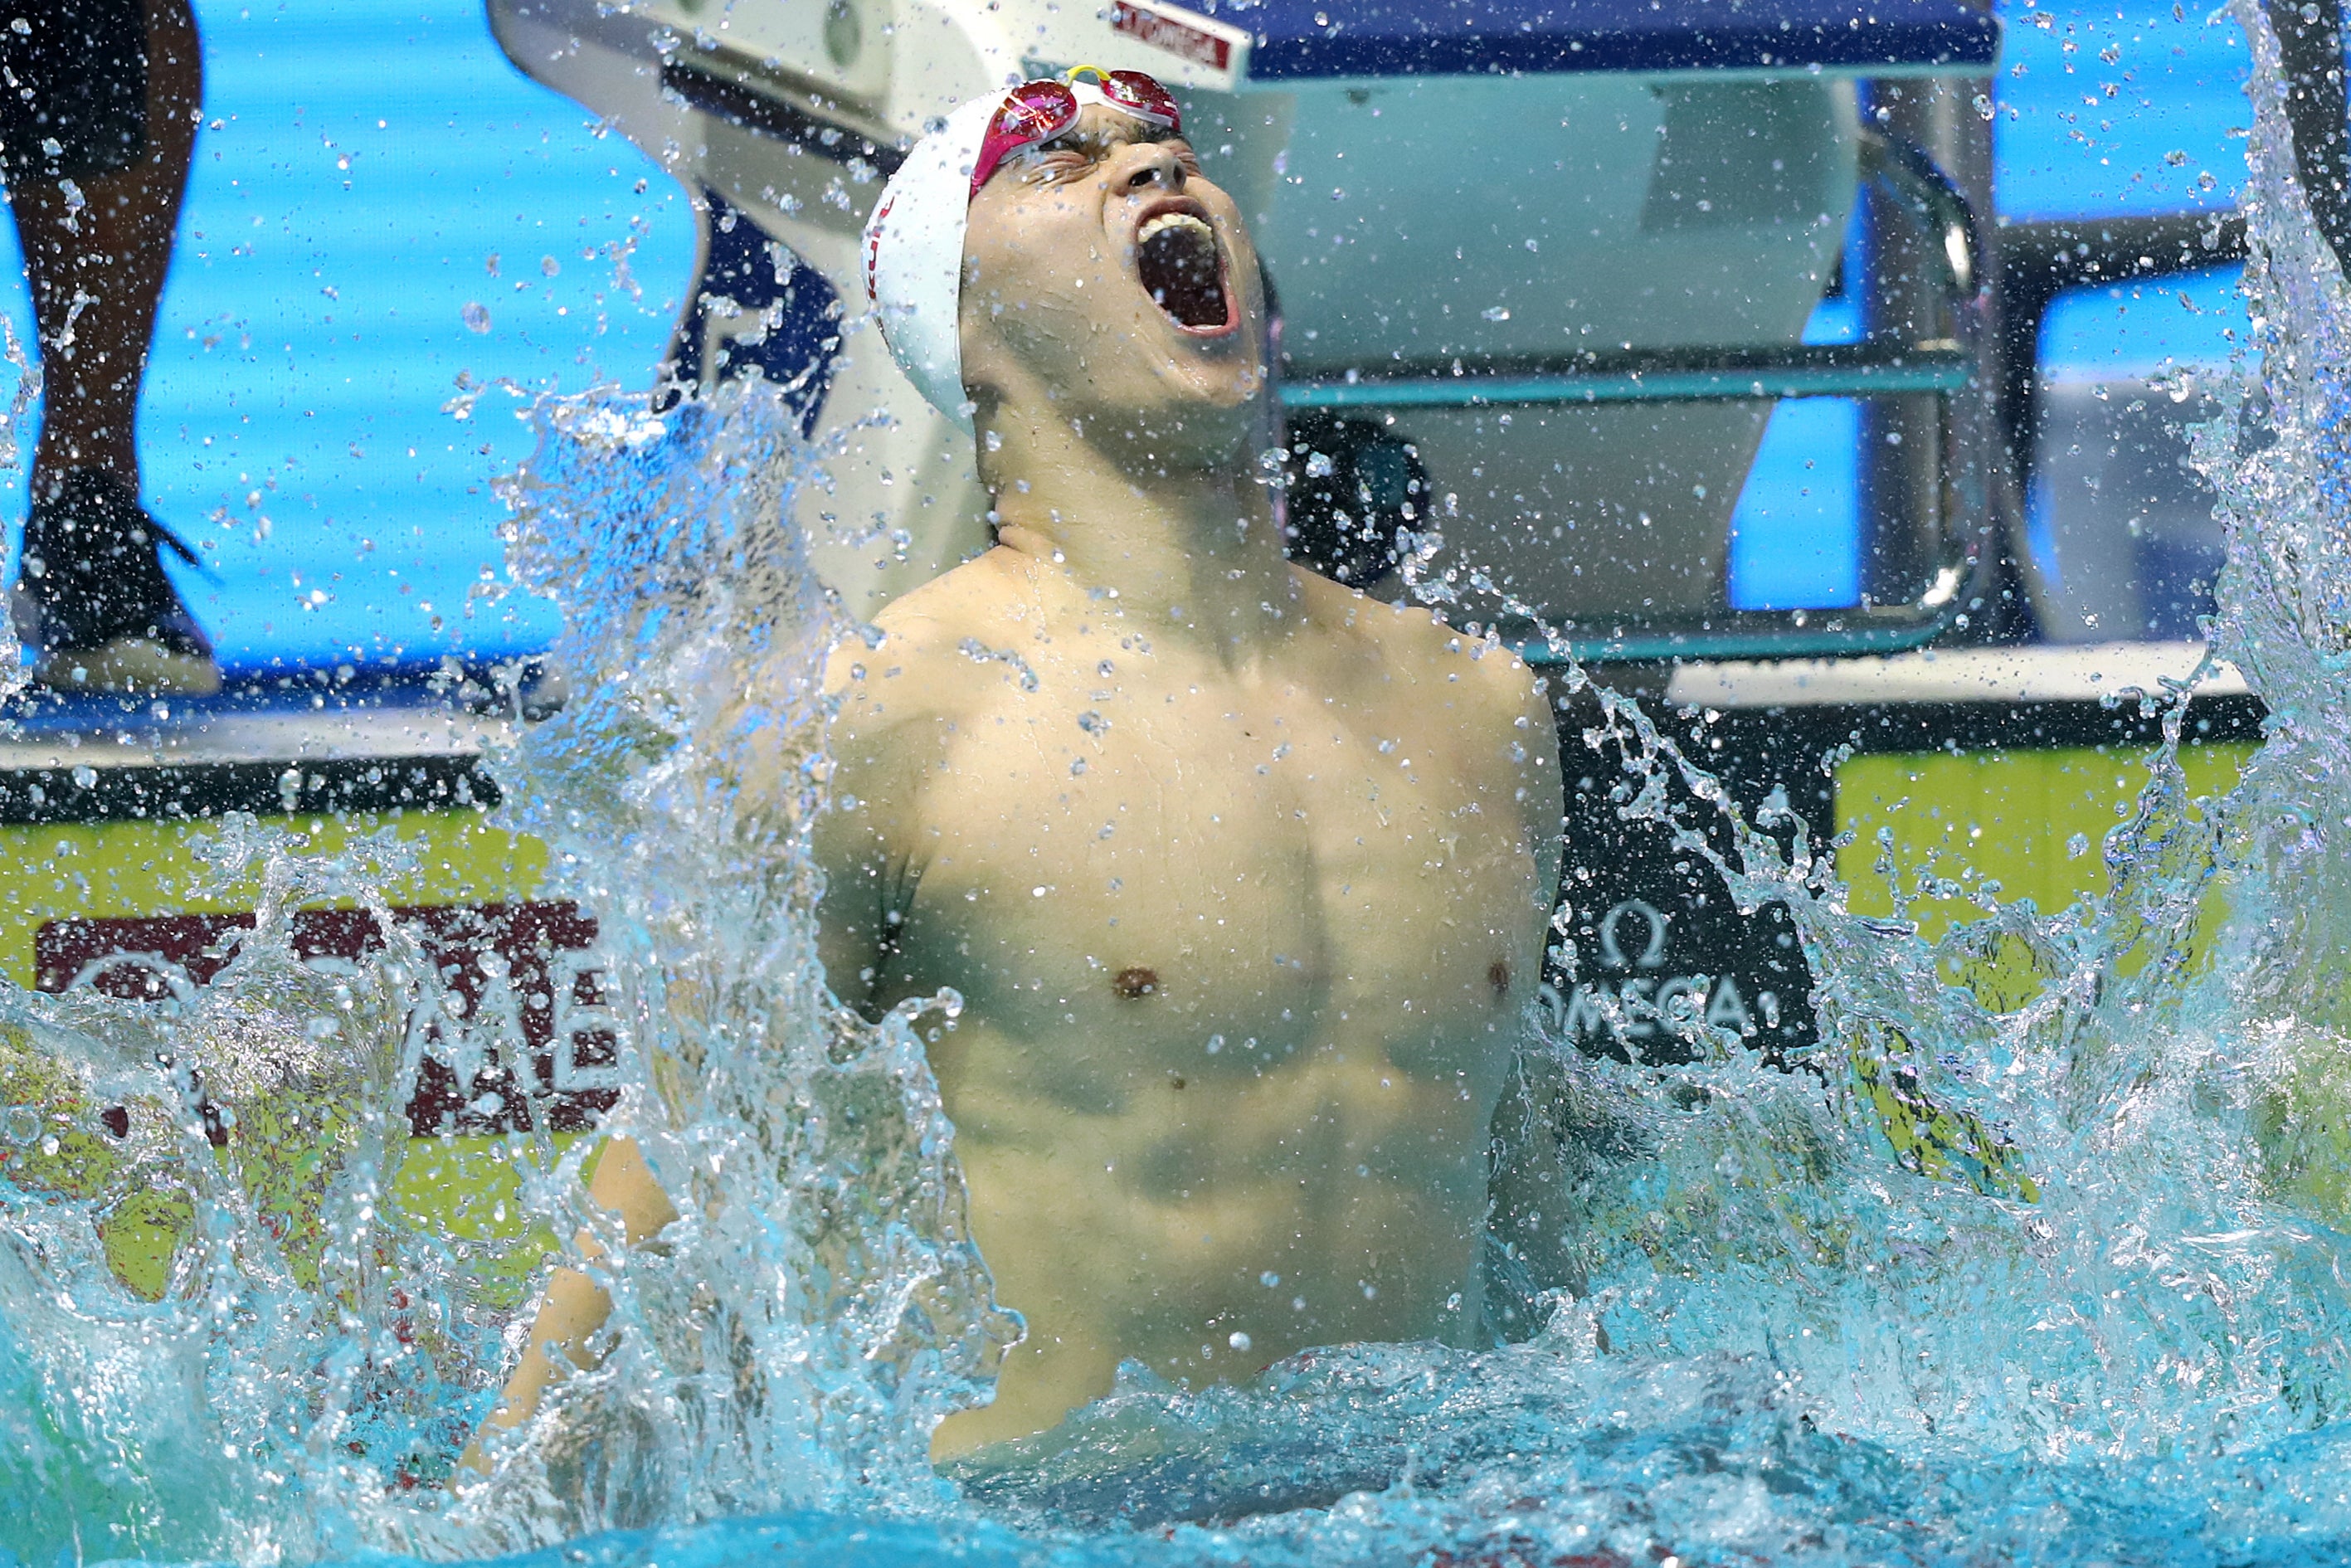 Sun Yang is one of the most controversial swimmers in the history of the sport